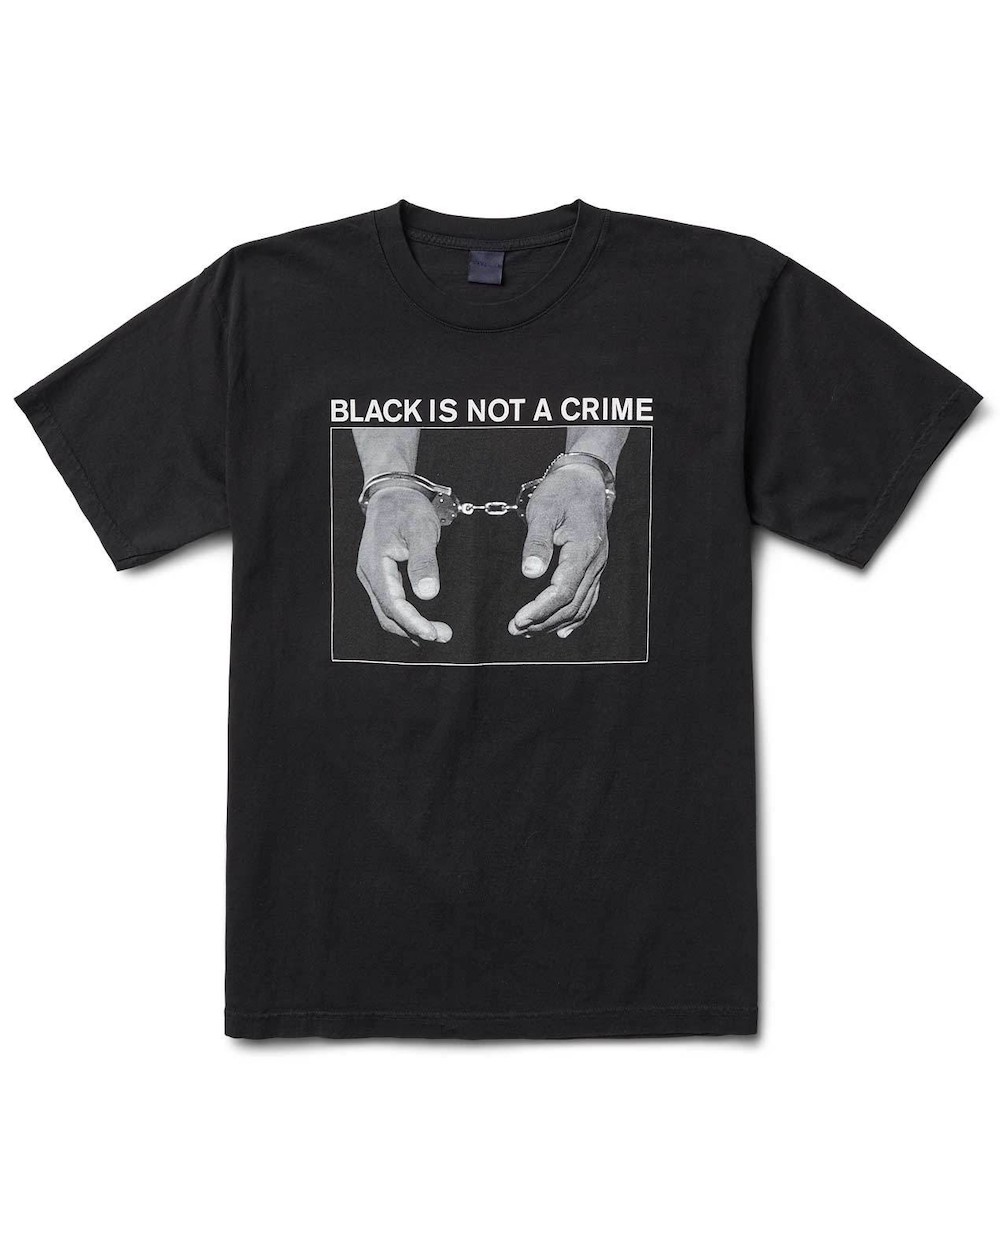 Freshjive Releases 'Black Is Not a Crime' Tee to Benefit